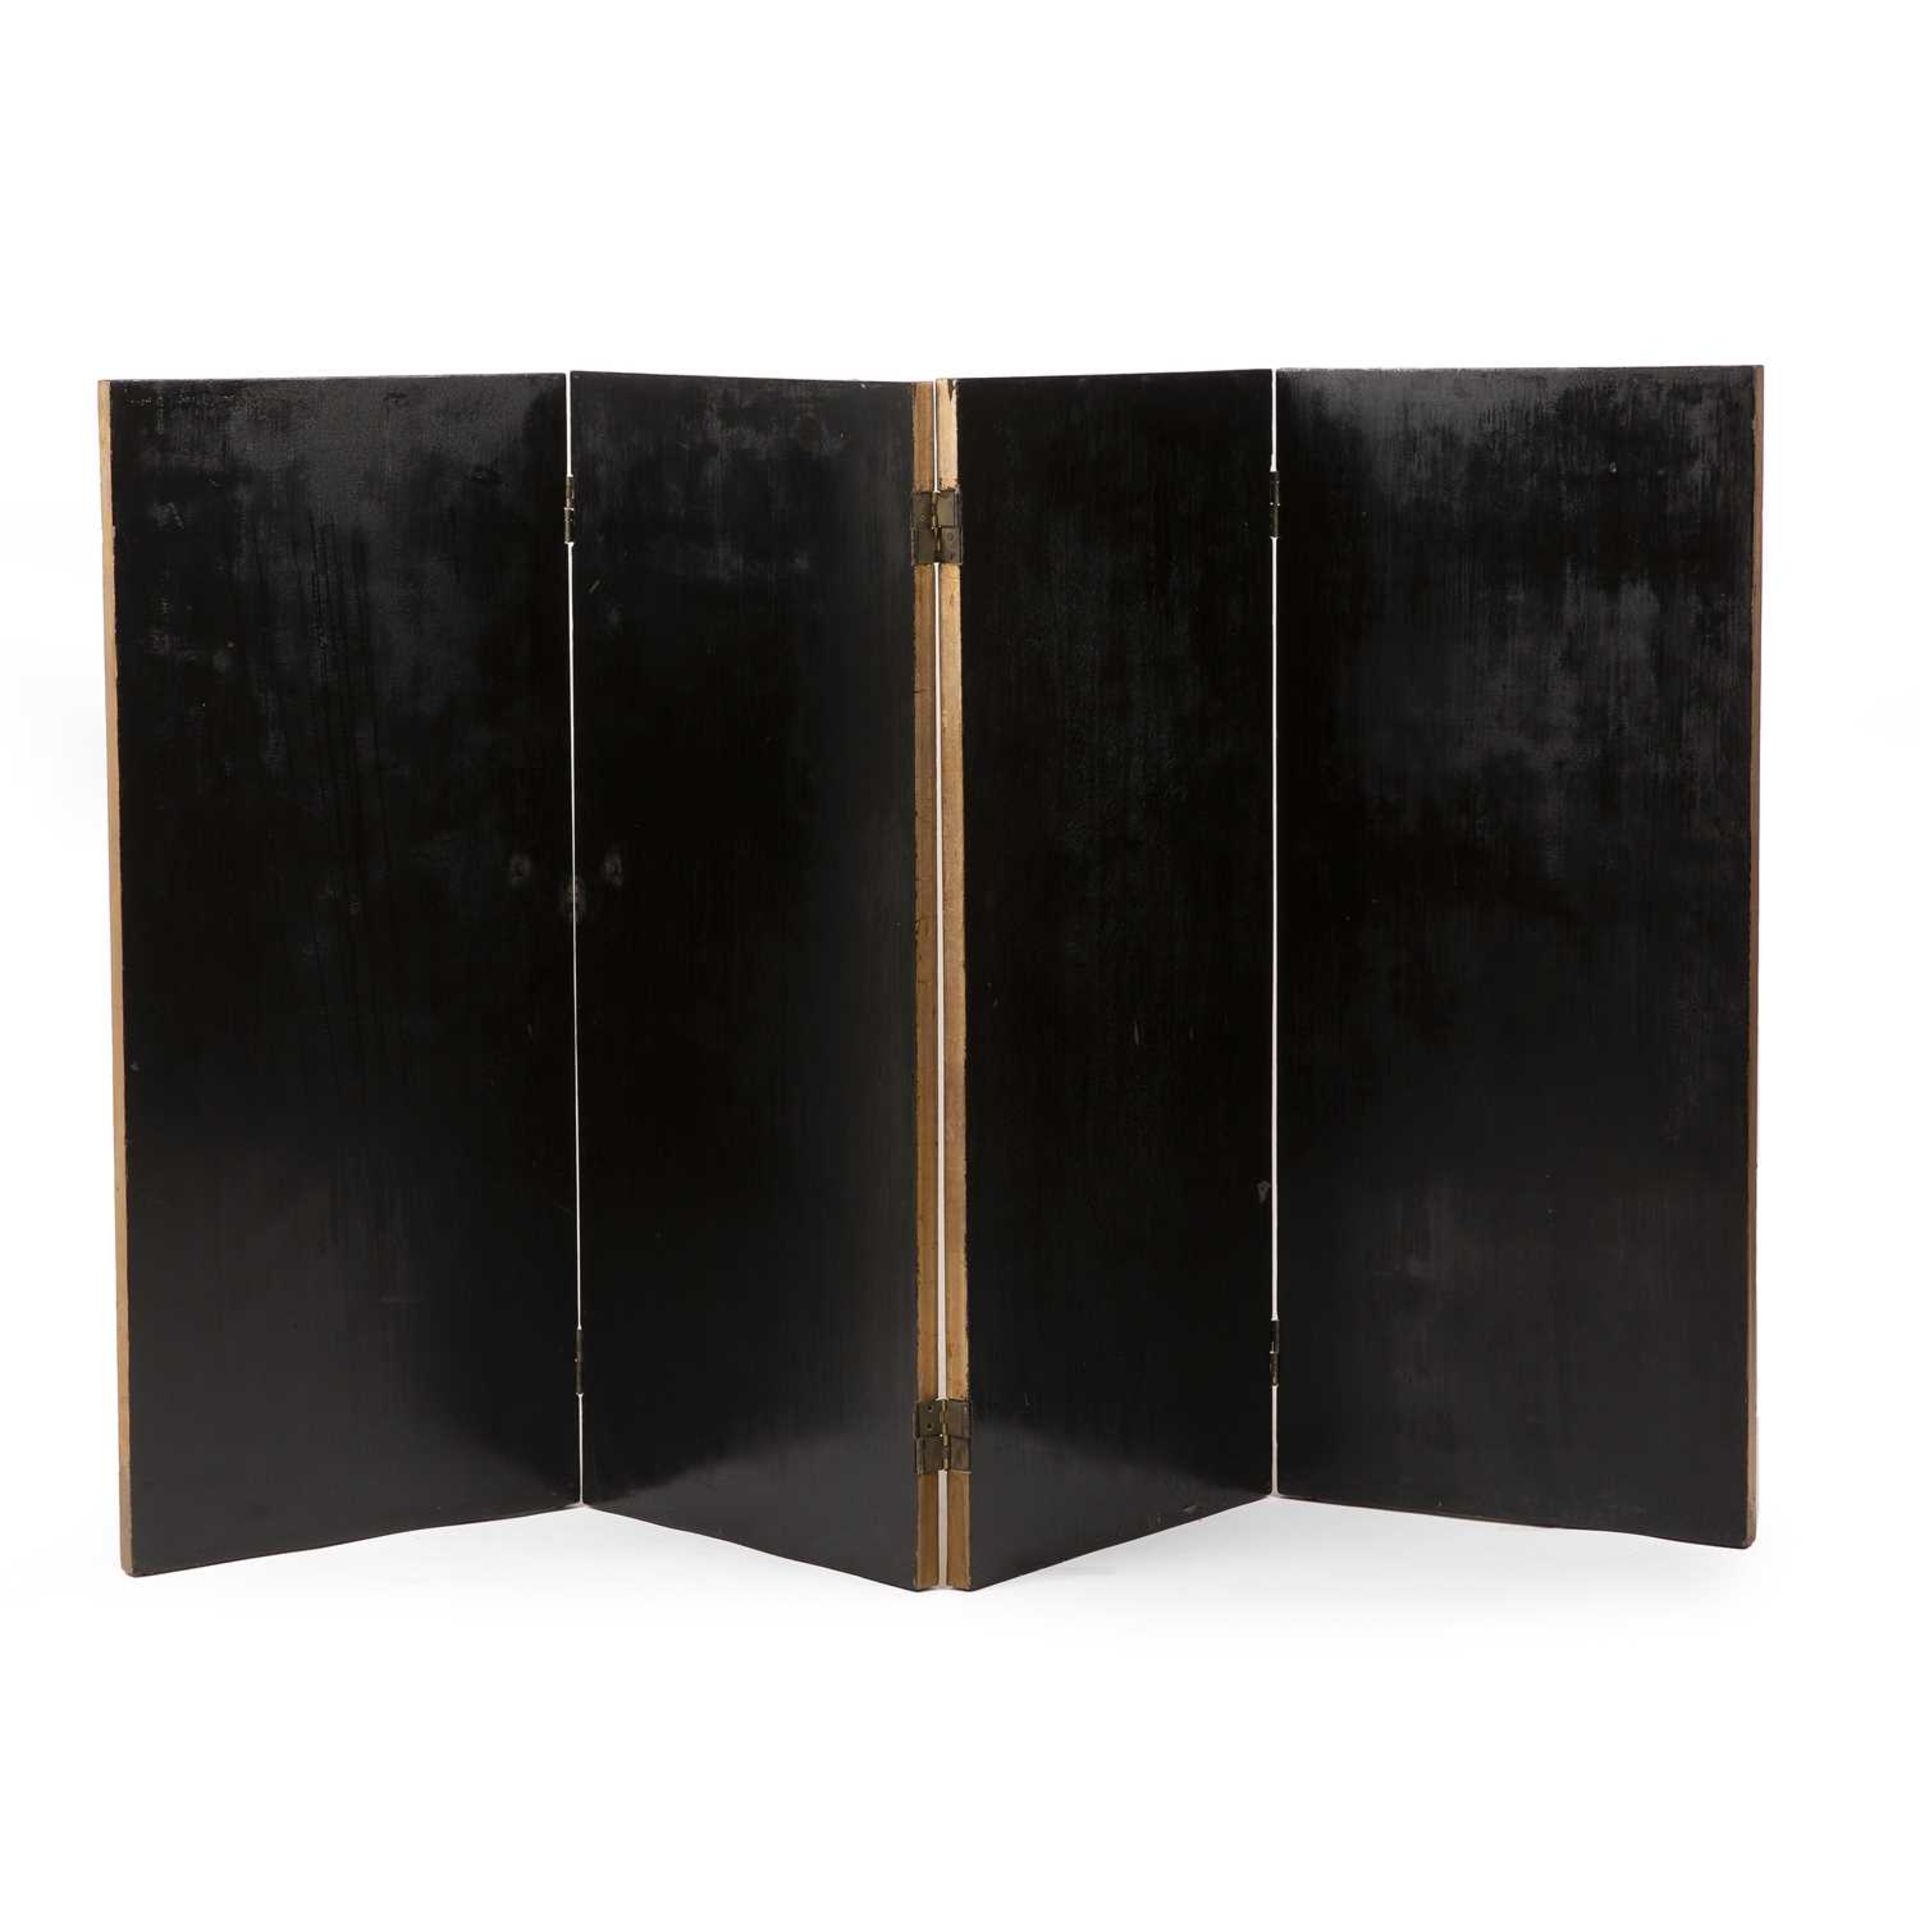 Manner of Jacques Adnet (1900-1984) Four-fold screen lacquered wood with the reverse and edges